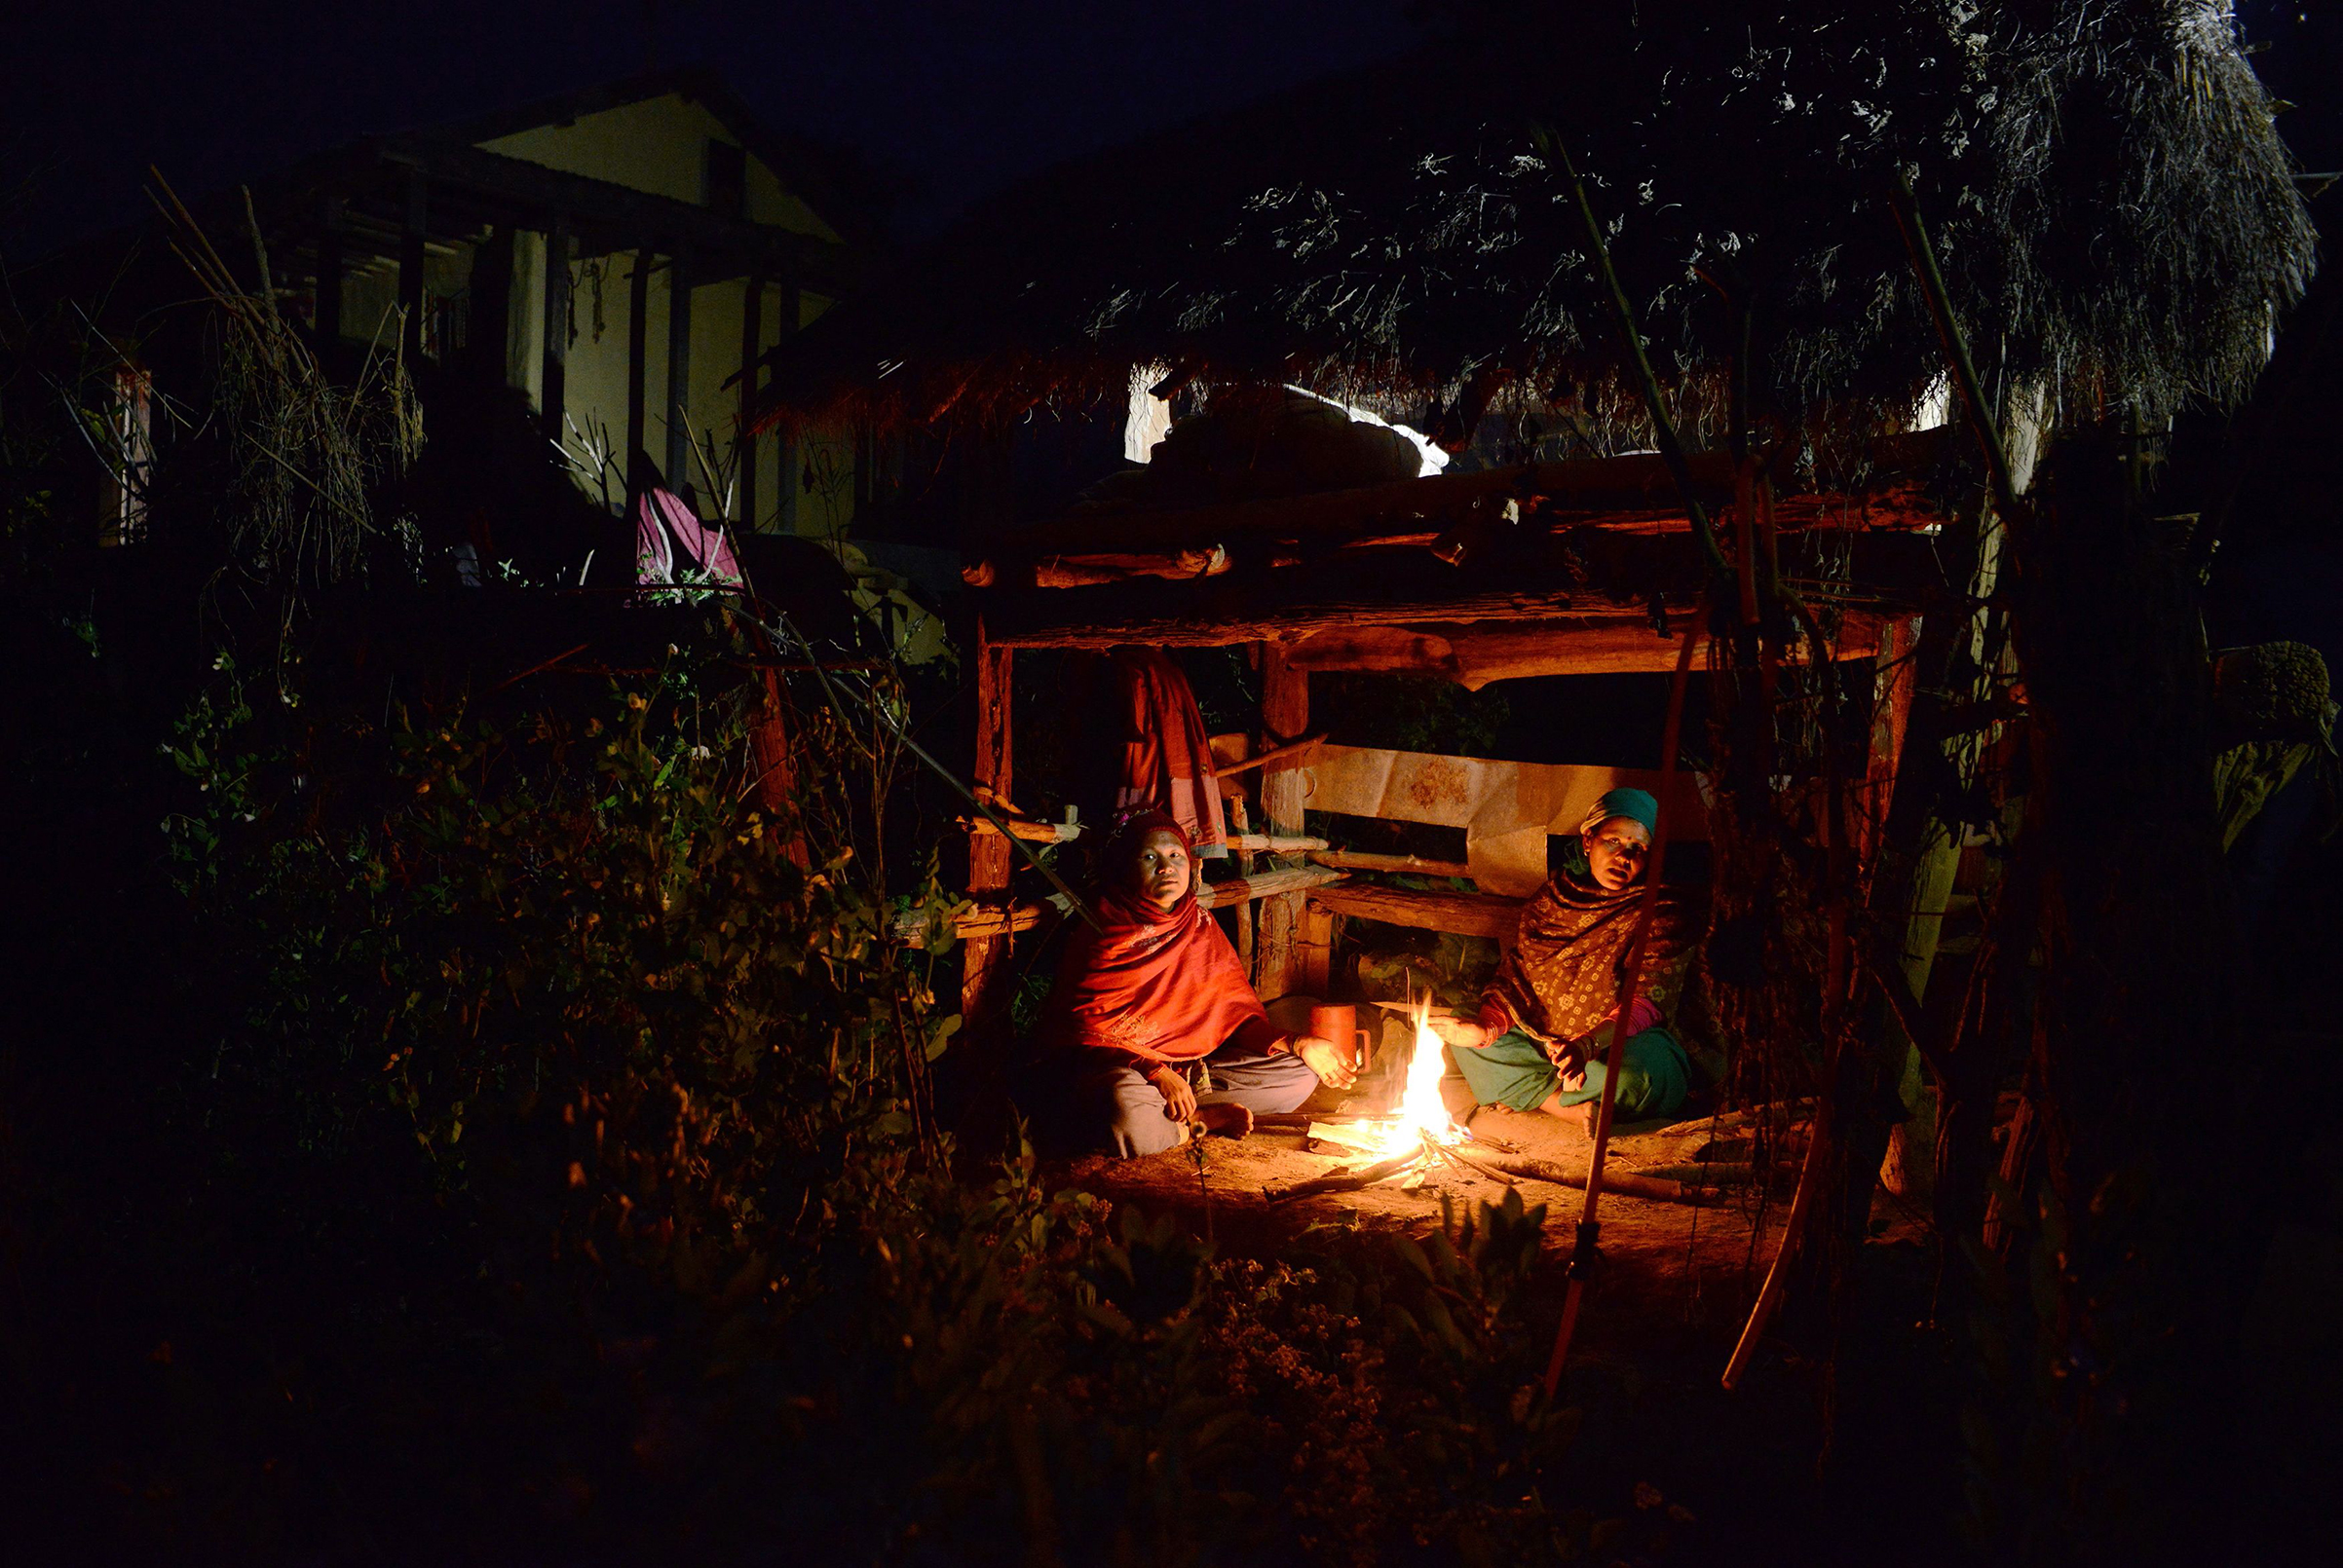 Nepalese women Pabitra Giri (L) and Yum Kumari Giri (R) sit by a fire as they live in a Chhaupadi hut during their menstruation period in Surkhet District, some 520km west of Kathmandu on Feb. 3, 2017. (Prakash Mathema—AFP/Getty Images)